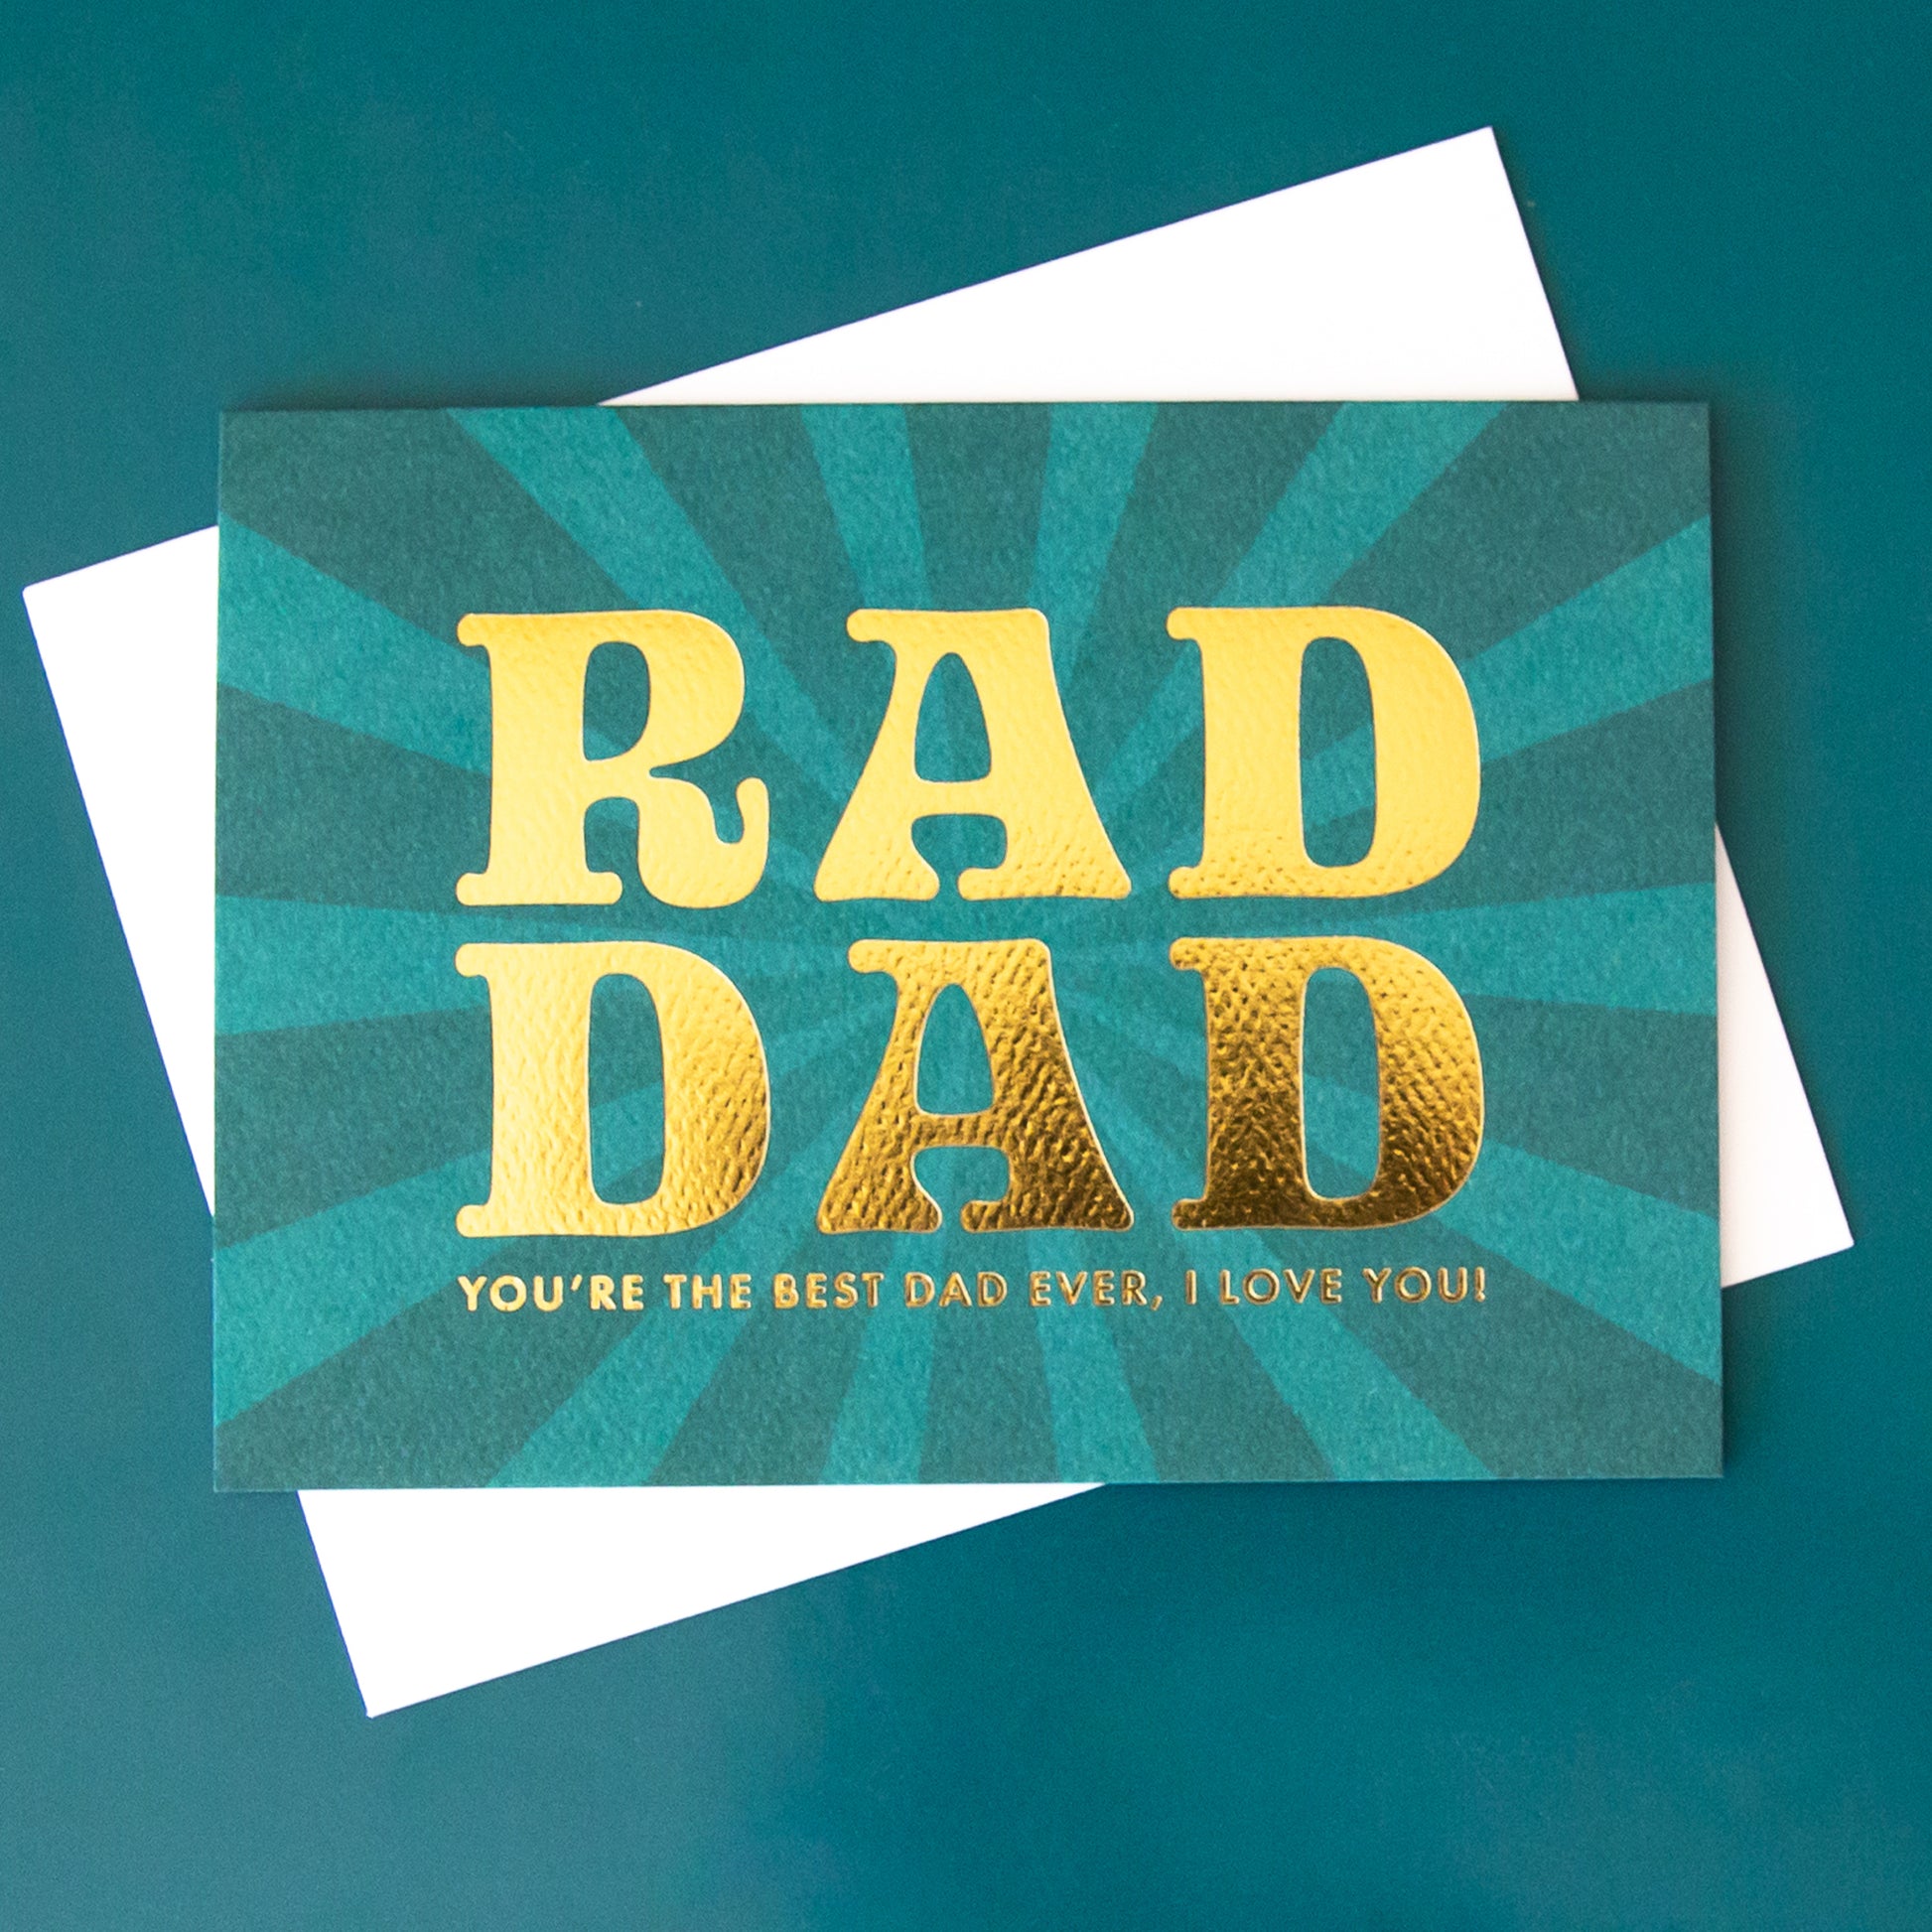 On a green background is a blue teal card with gold text that reads, "Rad Dad You're The Best Dad Ever, I Love You".